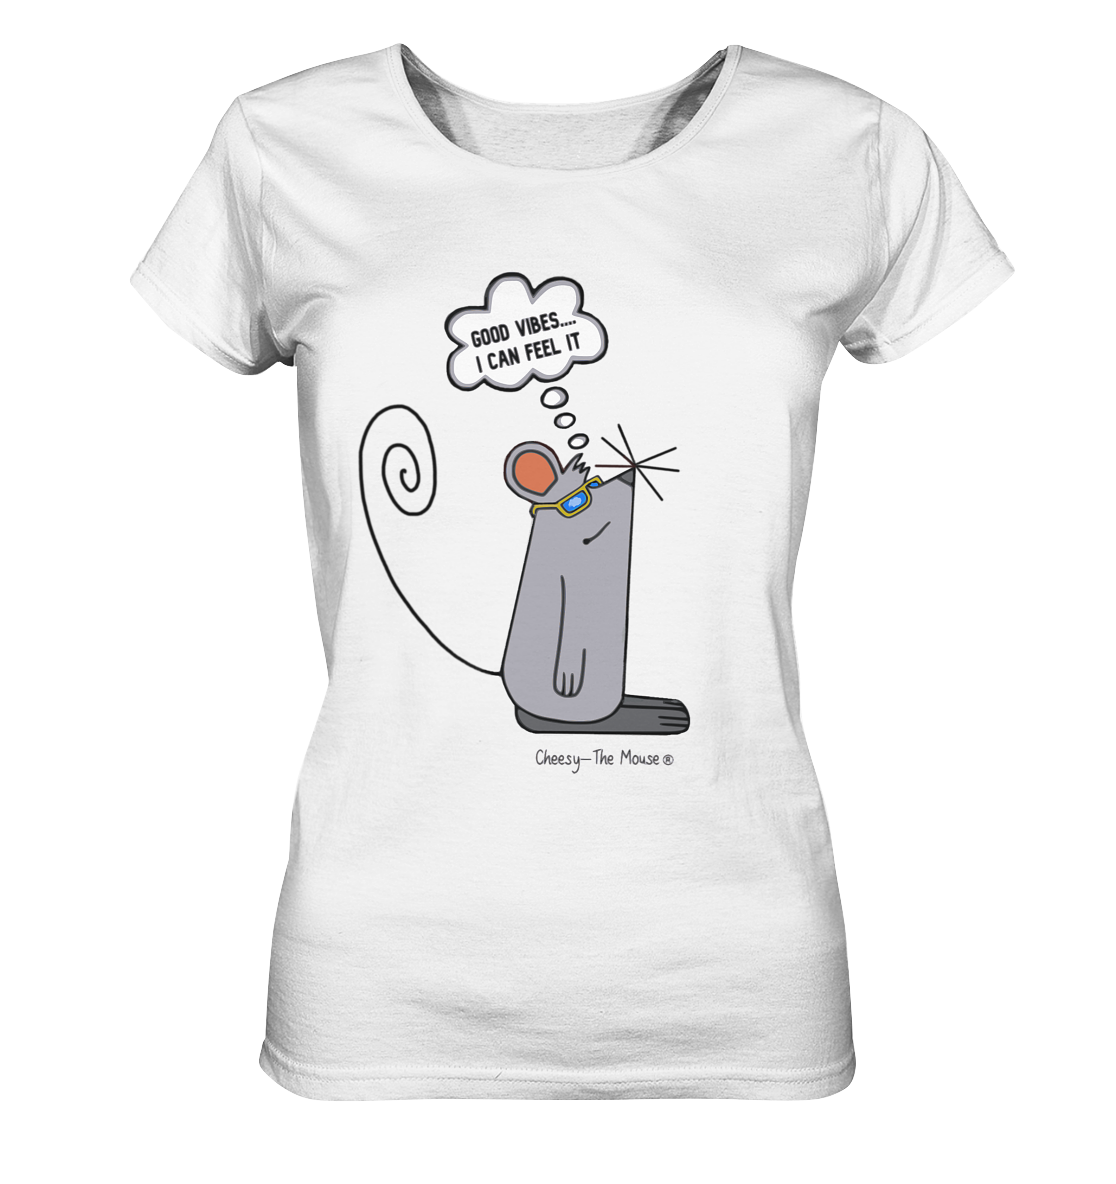 Cheesy -The Mouse Good Vibes - Ladies Organic Shirt